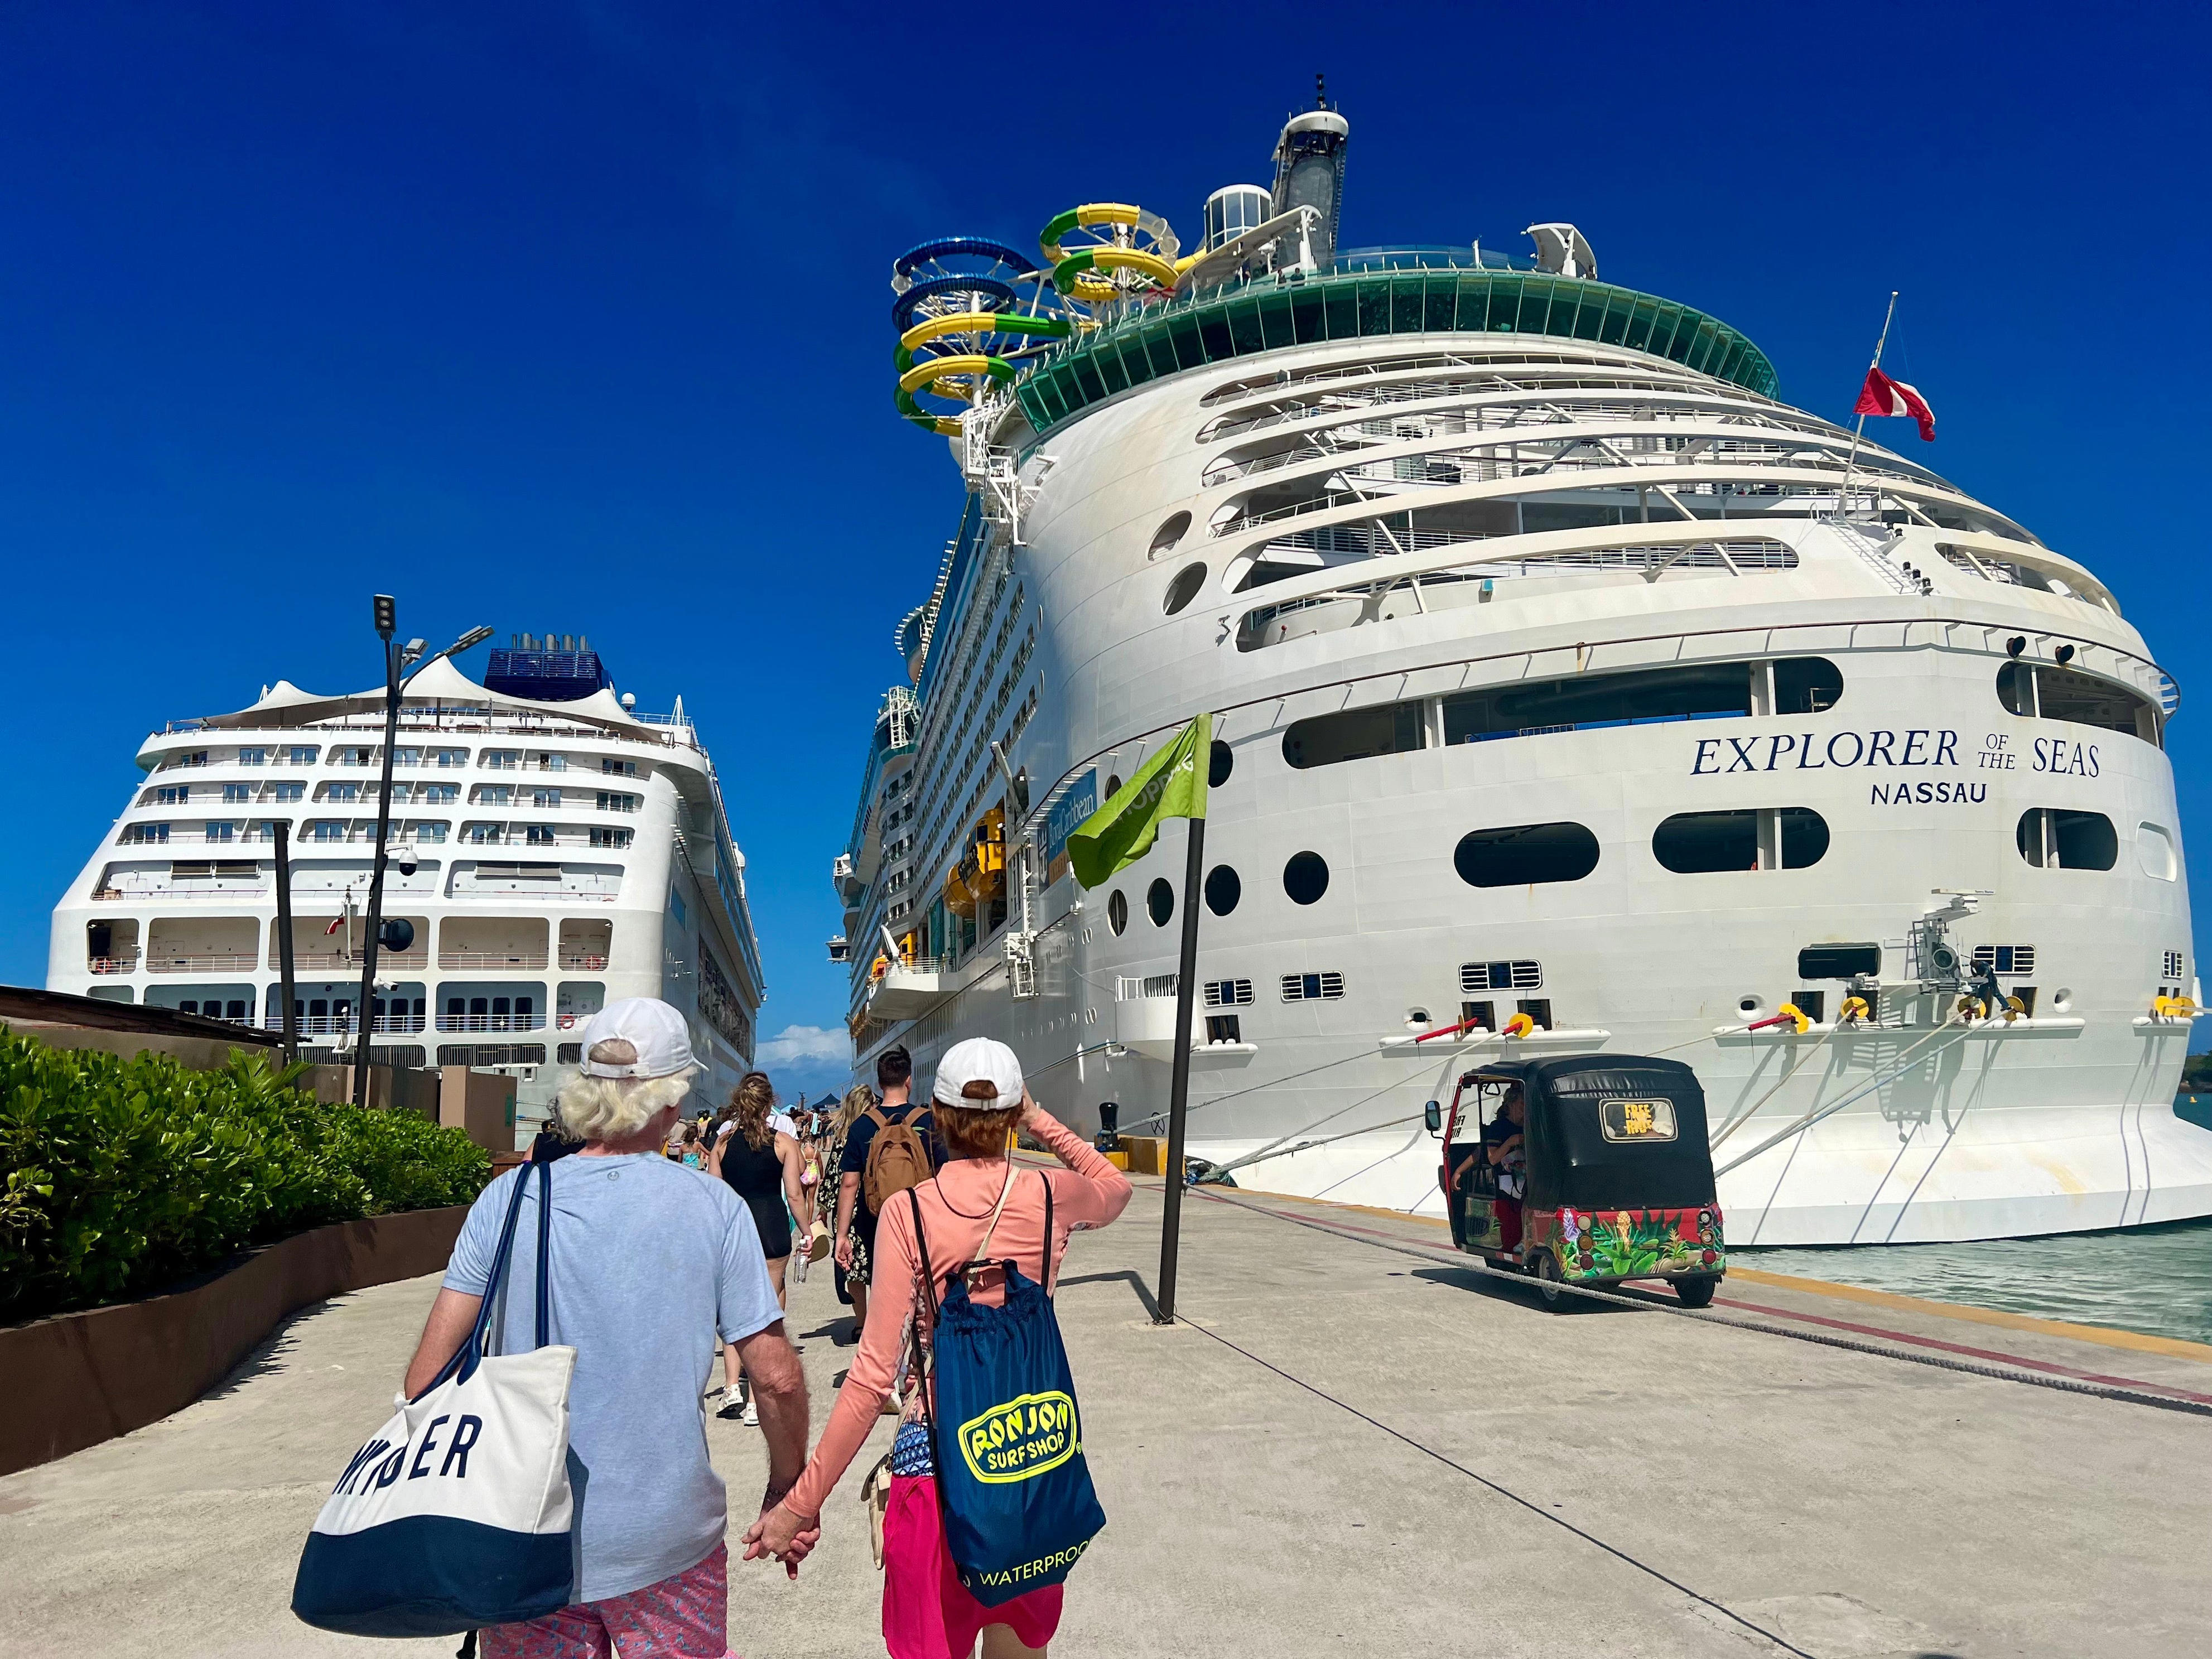 <p>We docked next to a giant Royal Caribbean ship with slides and other amenities poking out of its deck.</p>